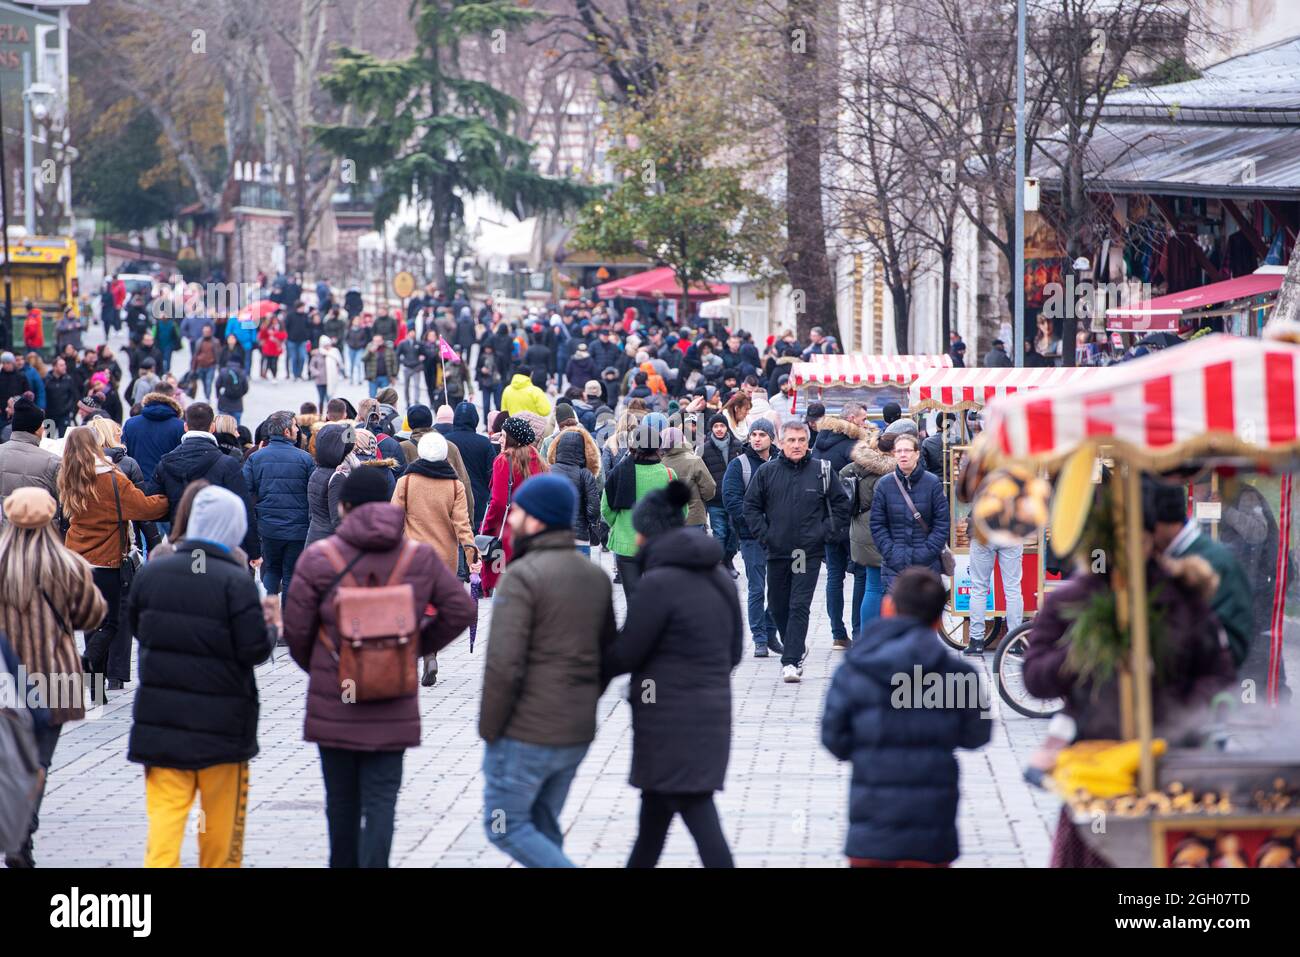 ISTANBUL - DEC 31: Crowd of people walking in winter day at the old town of Istanbul. Sultanahmet square with tourists, December 31. 2020 in Turkey Stock Photo